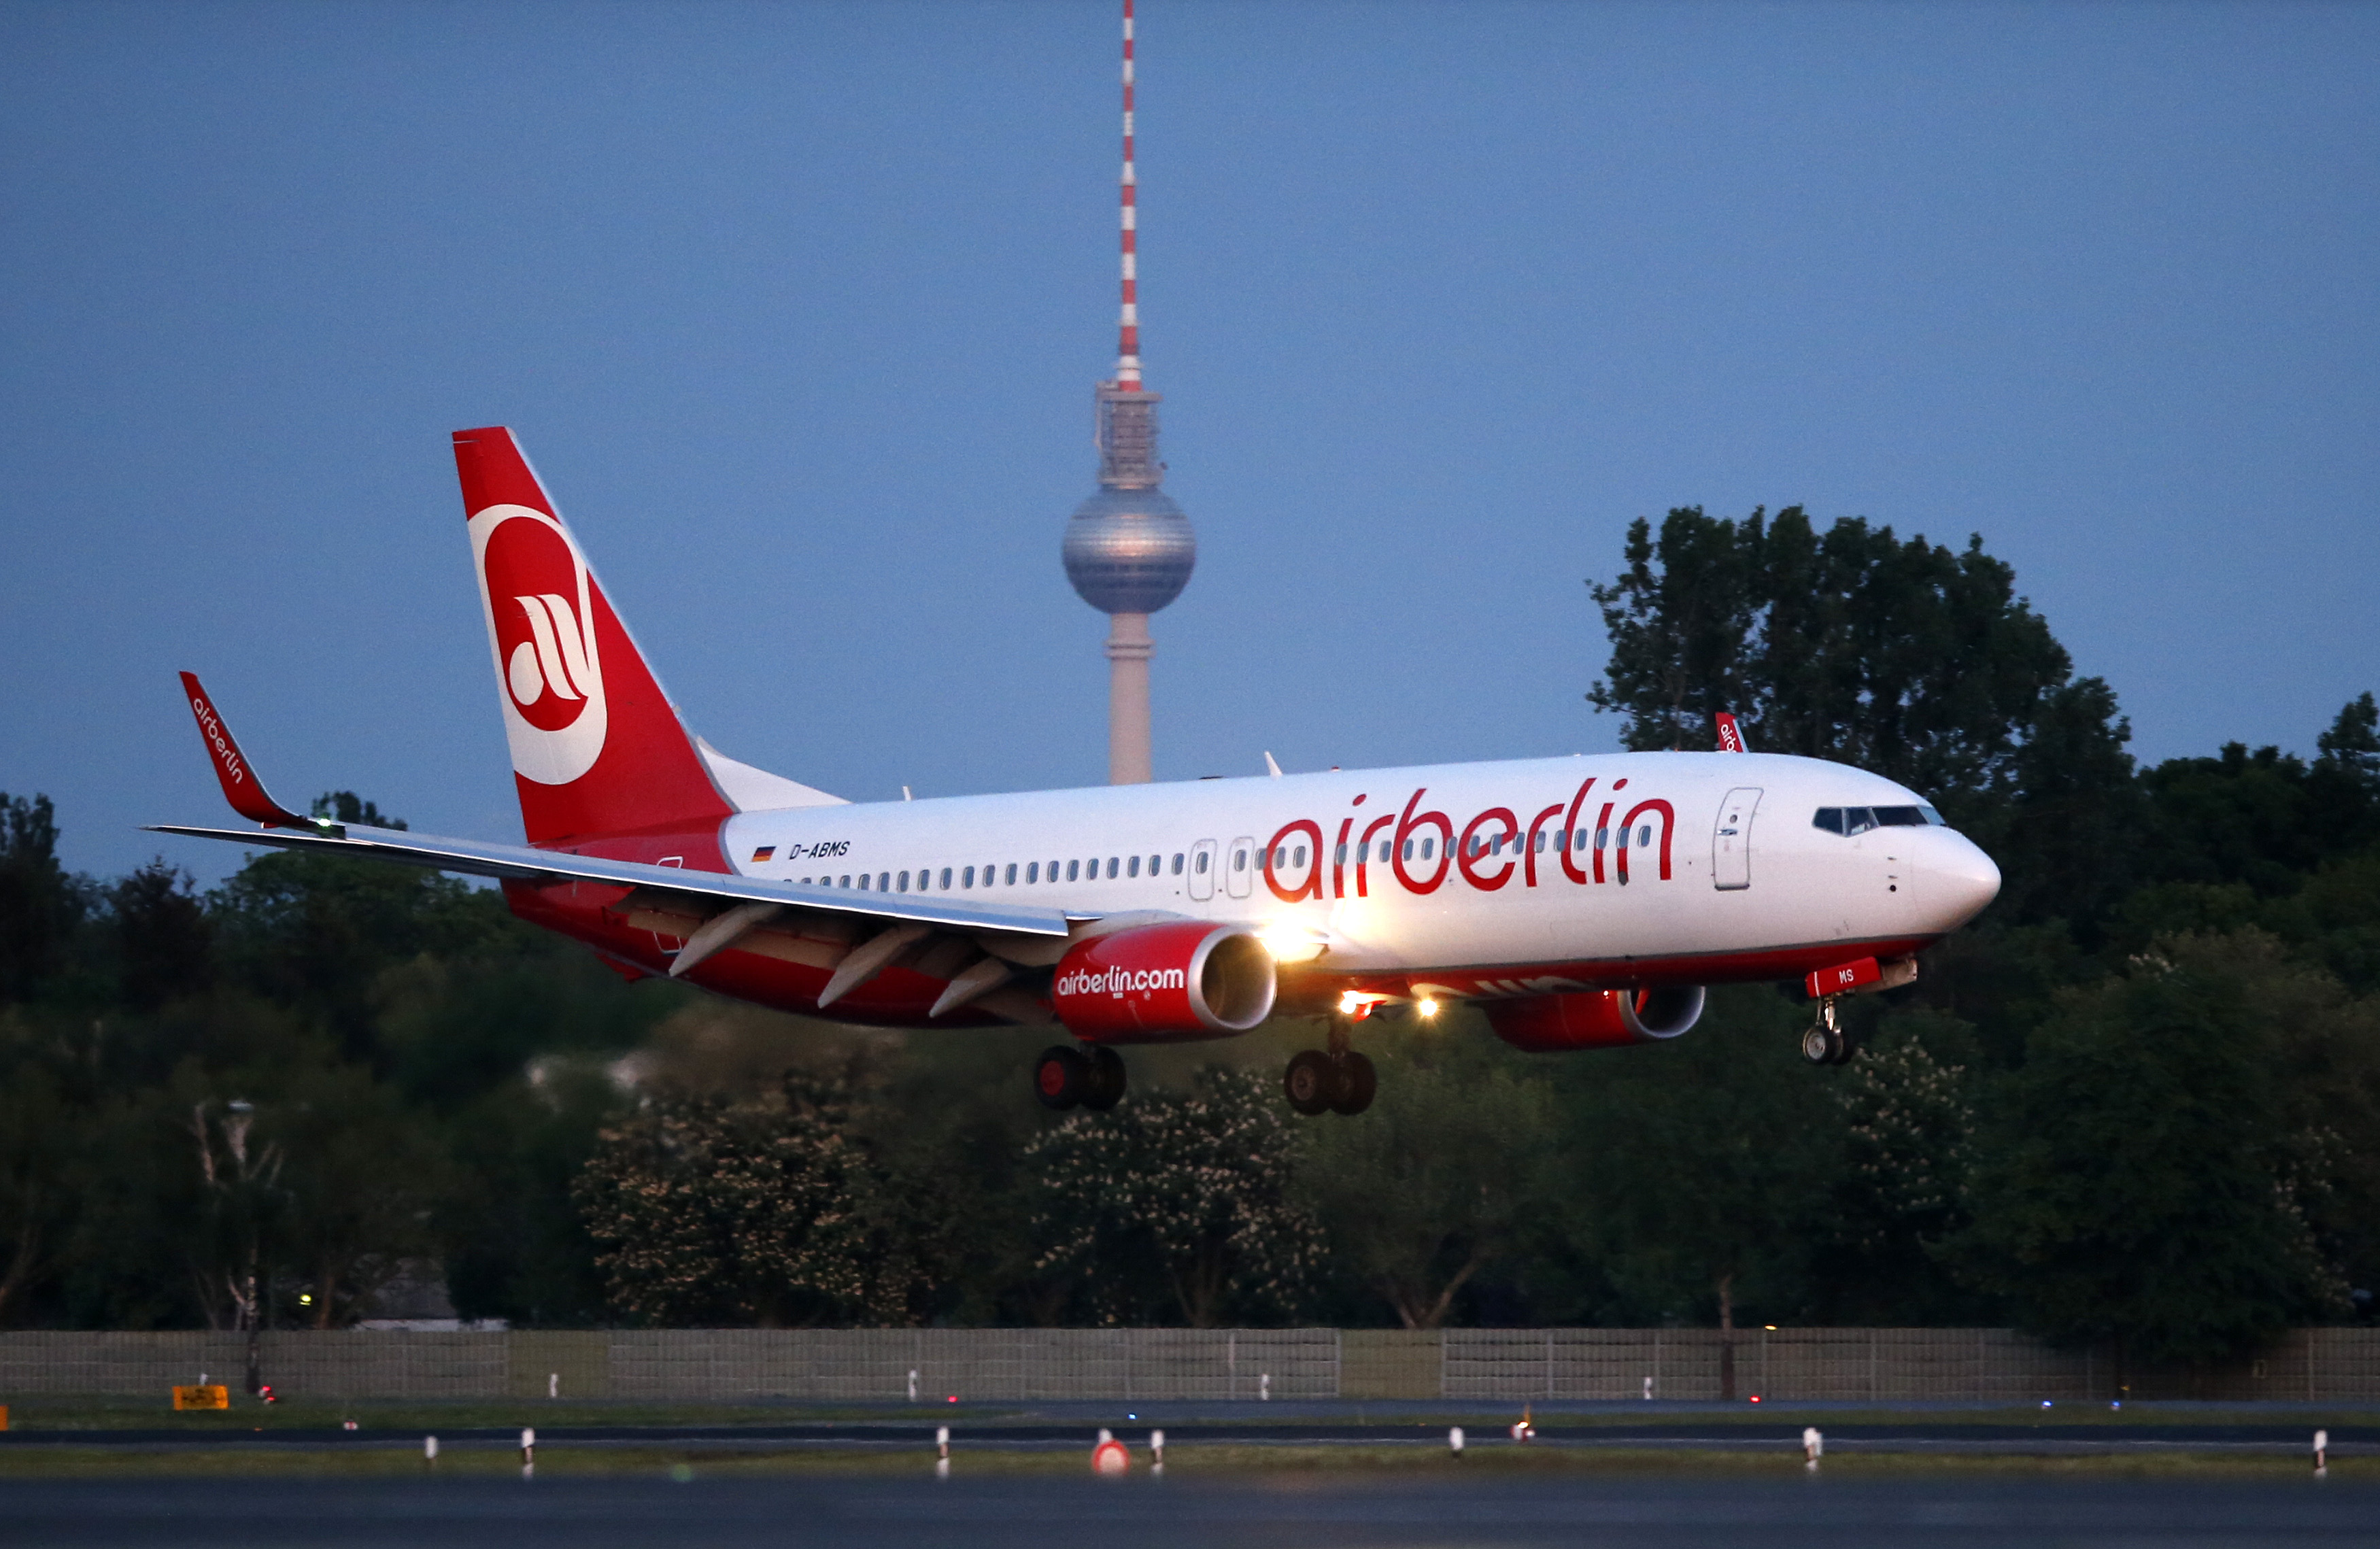 Air Berlin pilot cleared for low pass fly-by Dusseldorf airport in stunt as carrier went bankrupt - CBS News